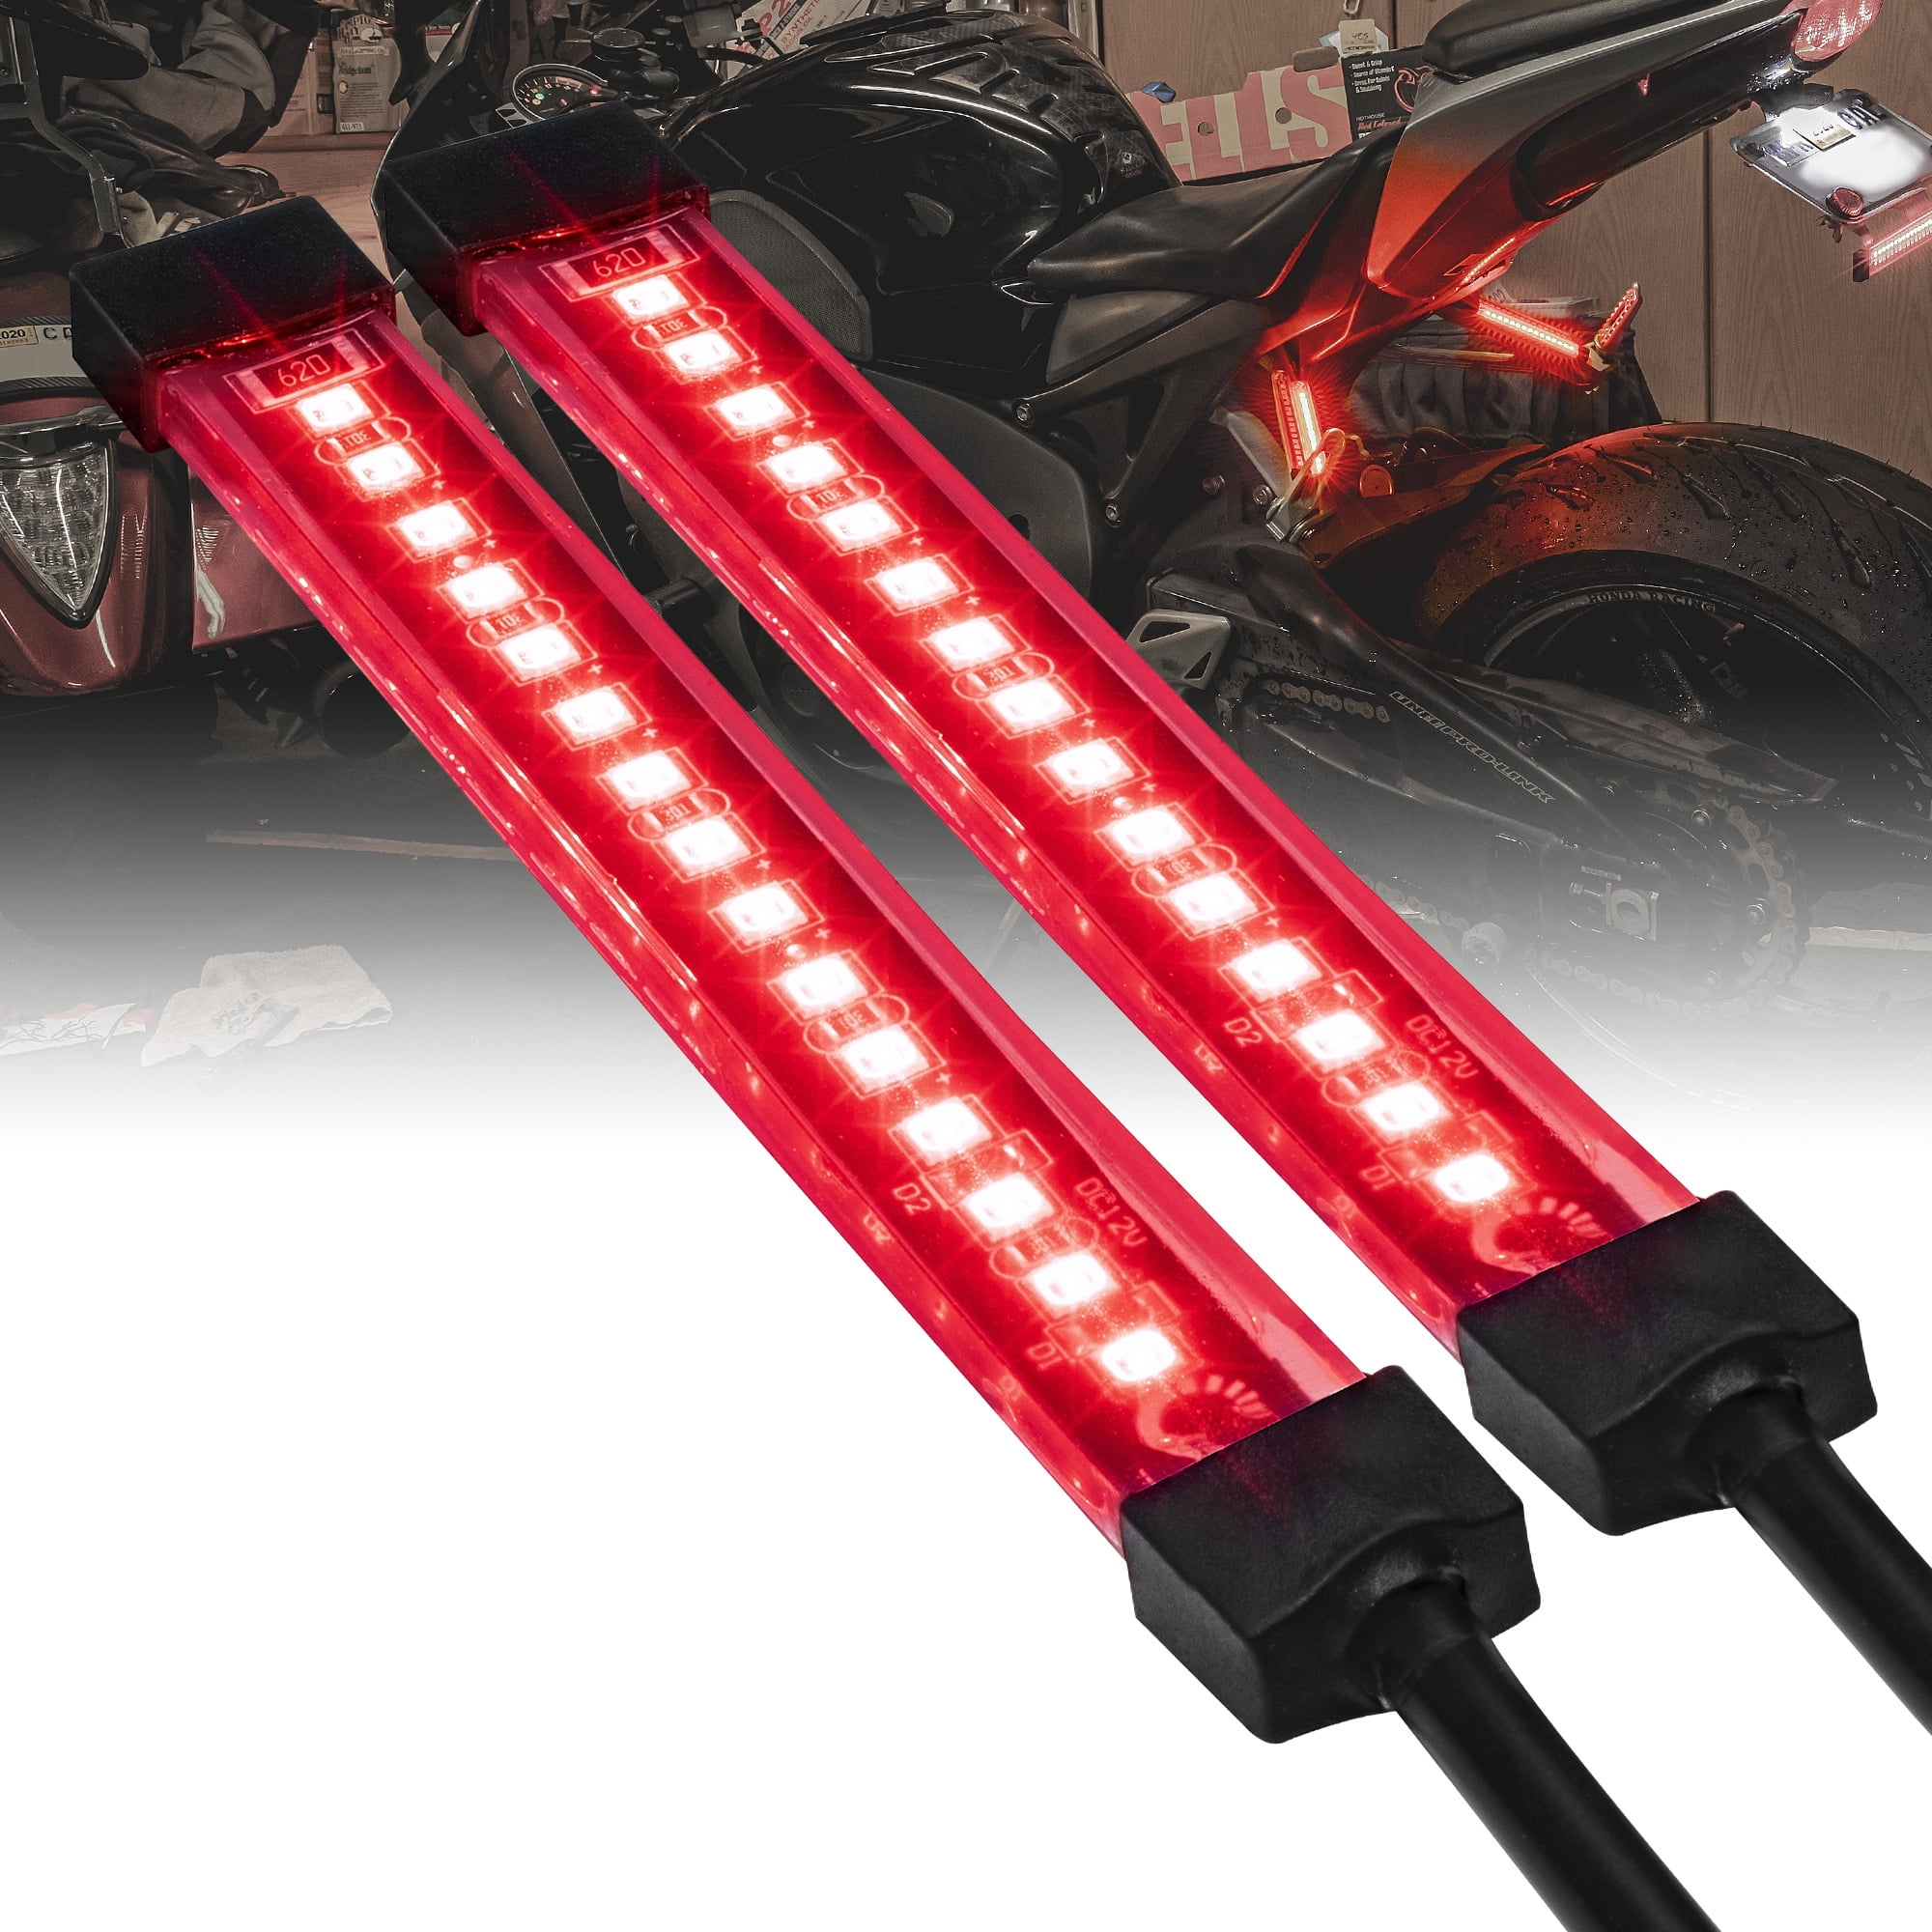 Motorcycle LED Rear Stop Tail Light with Bracket comes with Red and Clear lens 